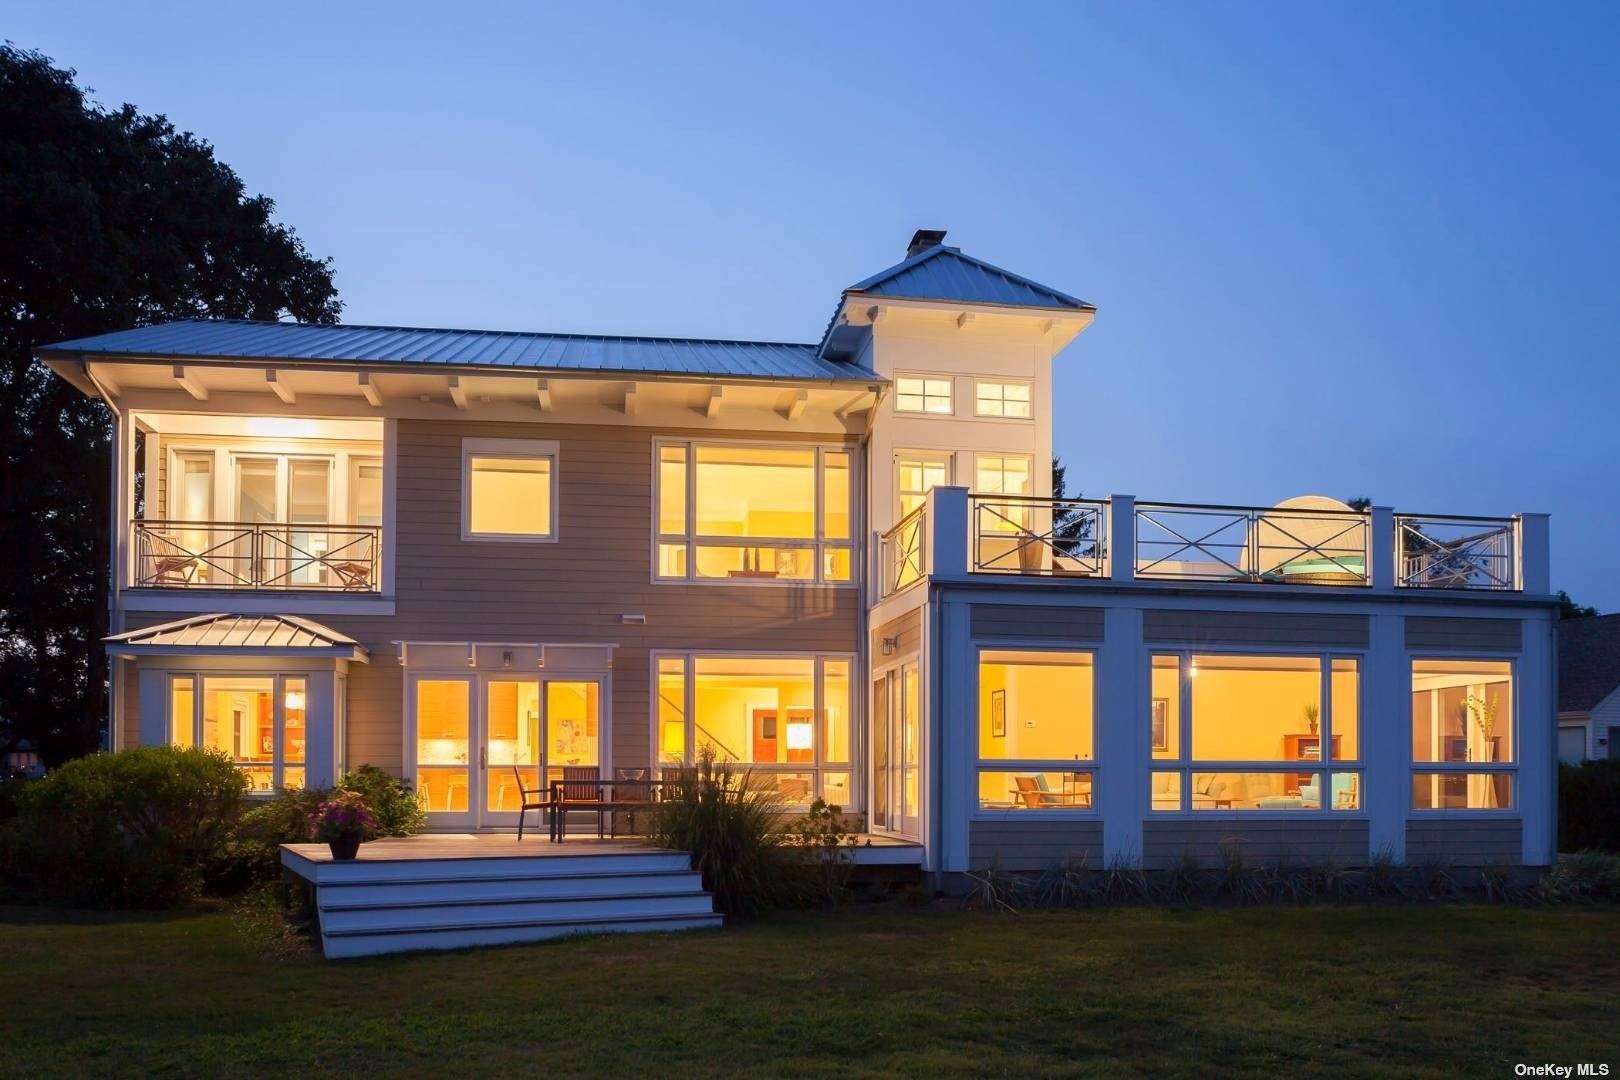 Beachfront, located in Southold Shores, this architect's own home is built with all the beautiful appointments you can imagine.